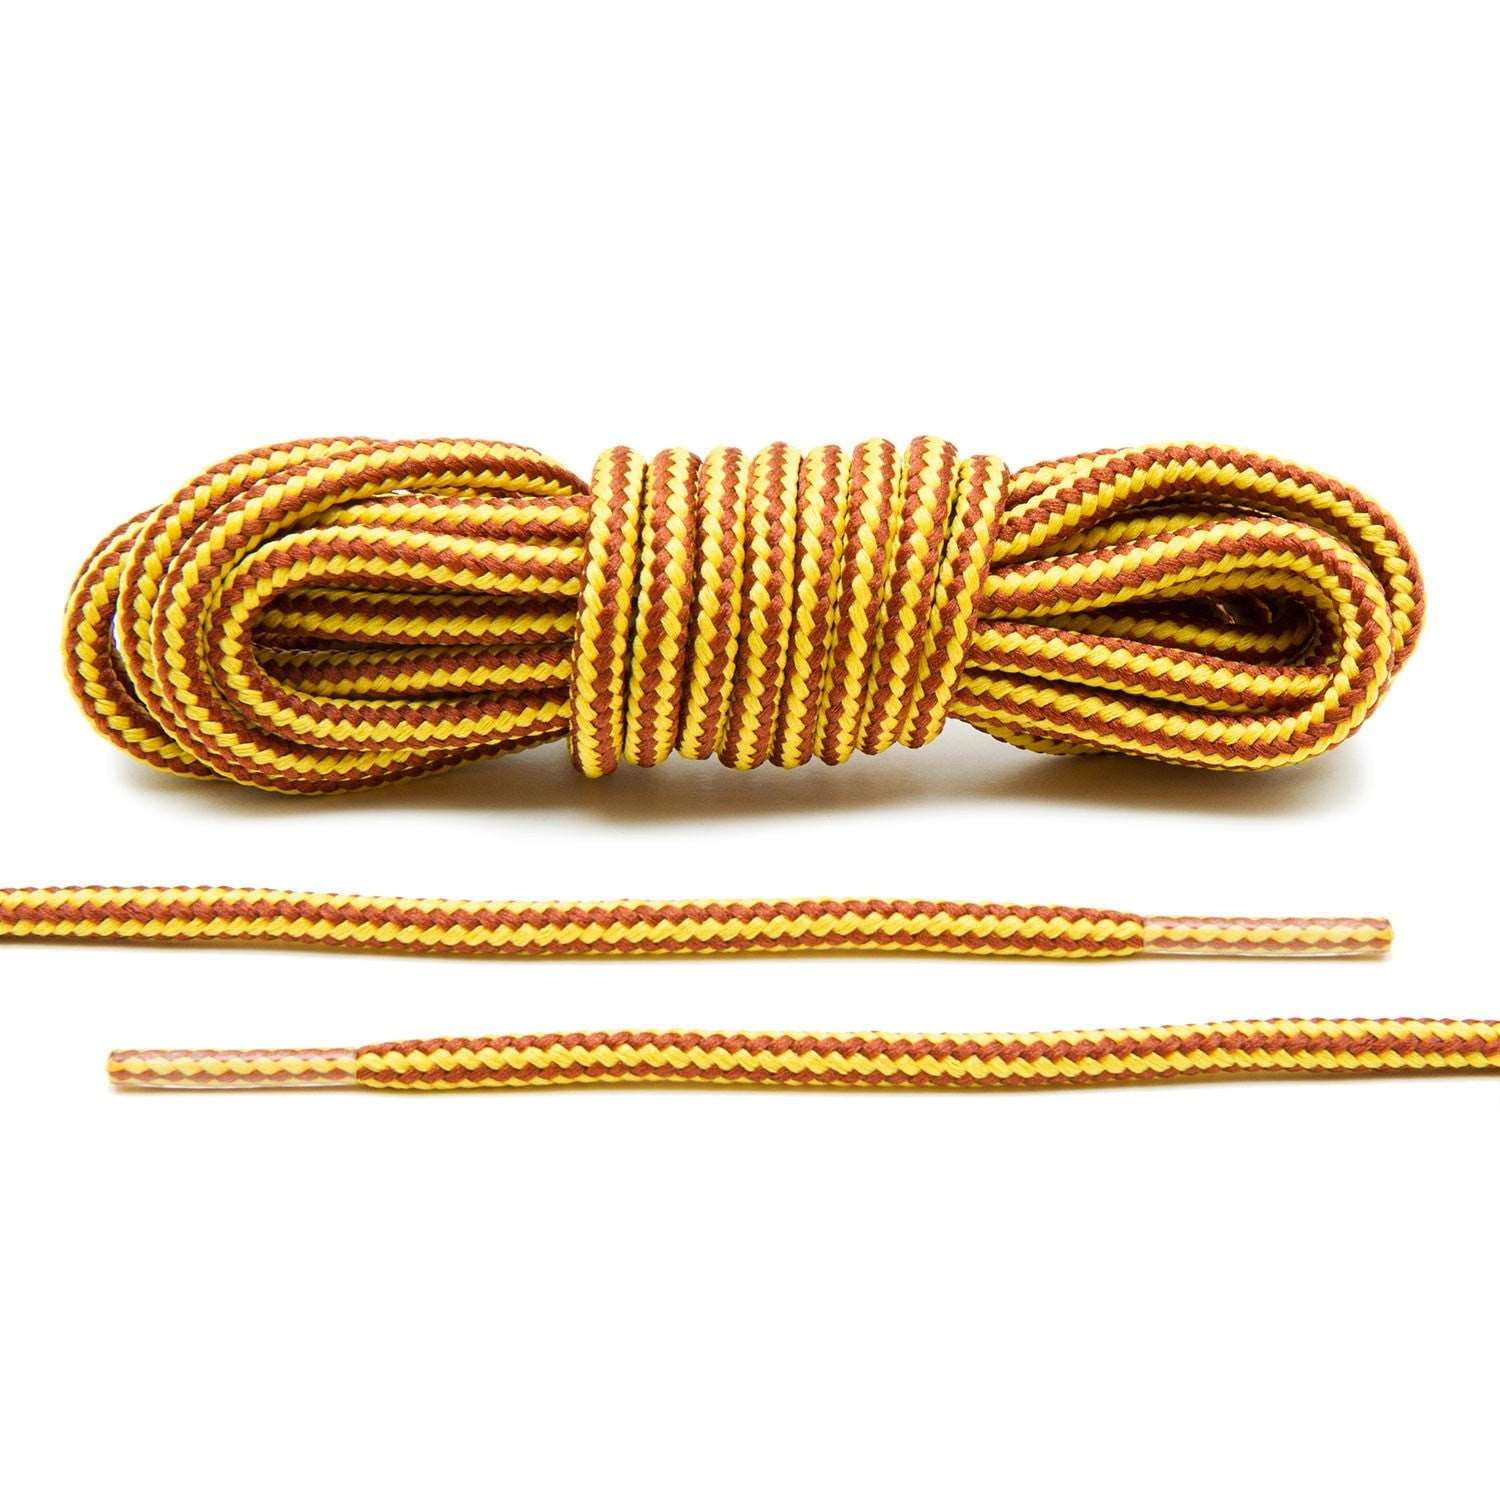 Rawhide Leather Shoe Laces 1/8 x 72 - Shoe & Boot Accessories 4 U